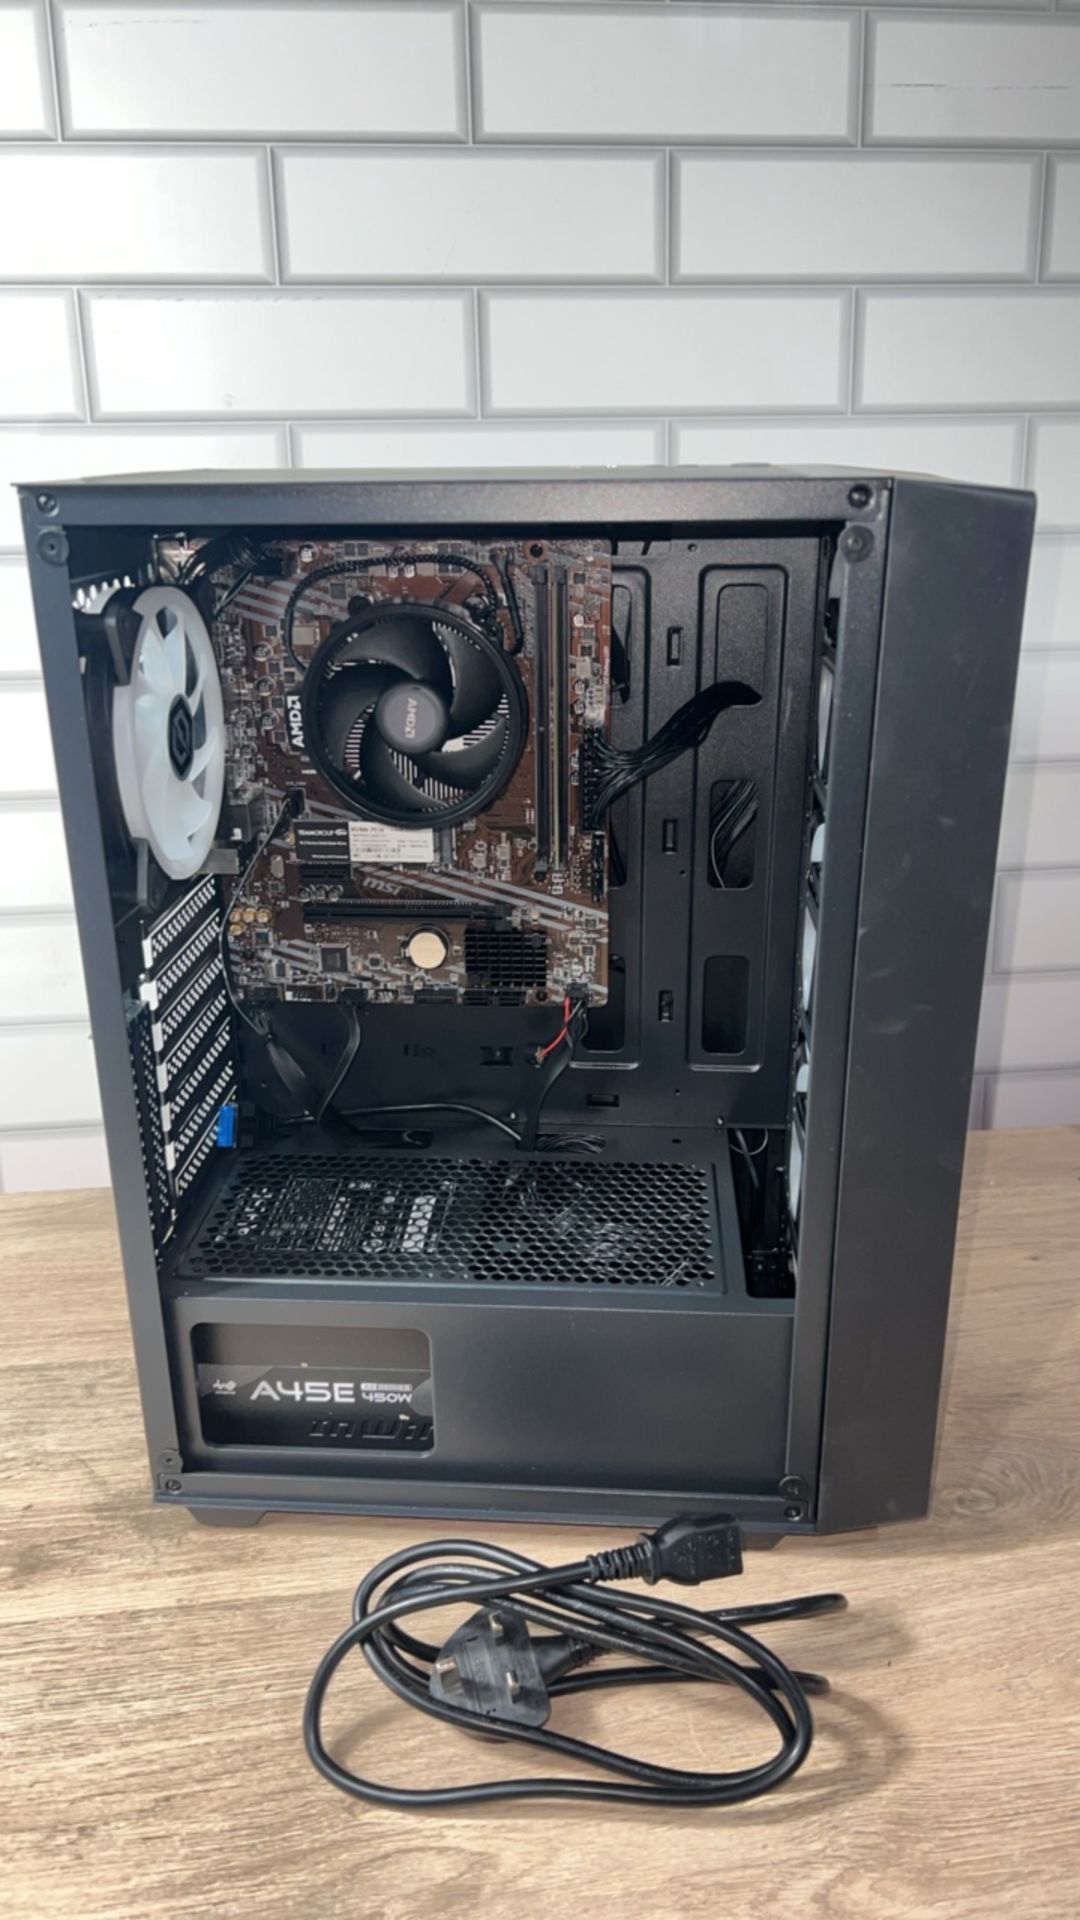 Cyberpower Eurus PC Tower - Image 2 of 8